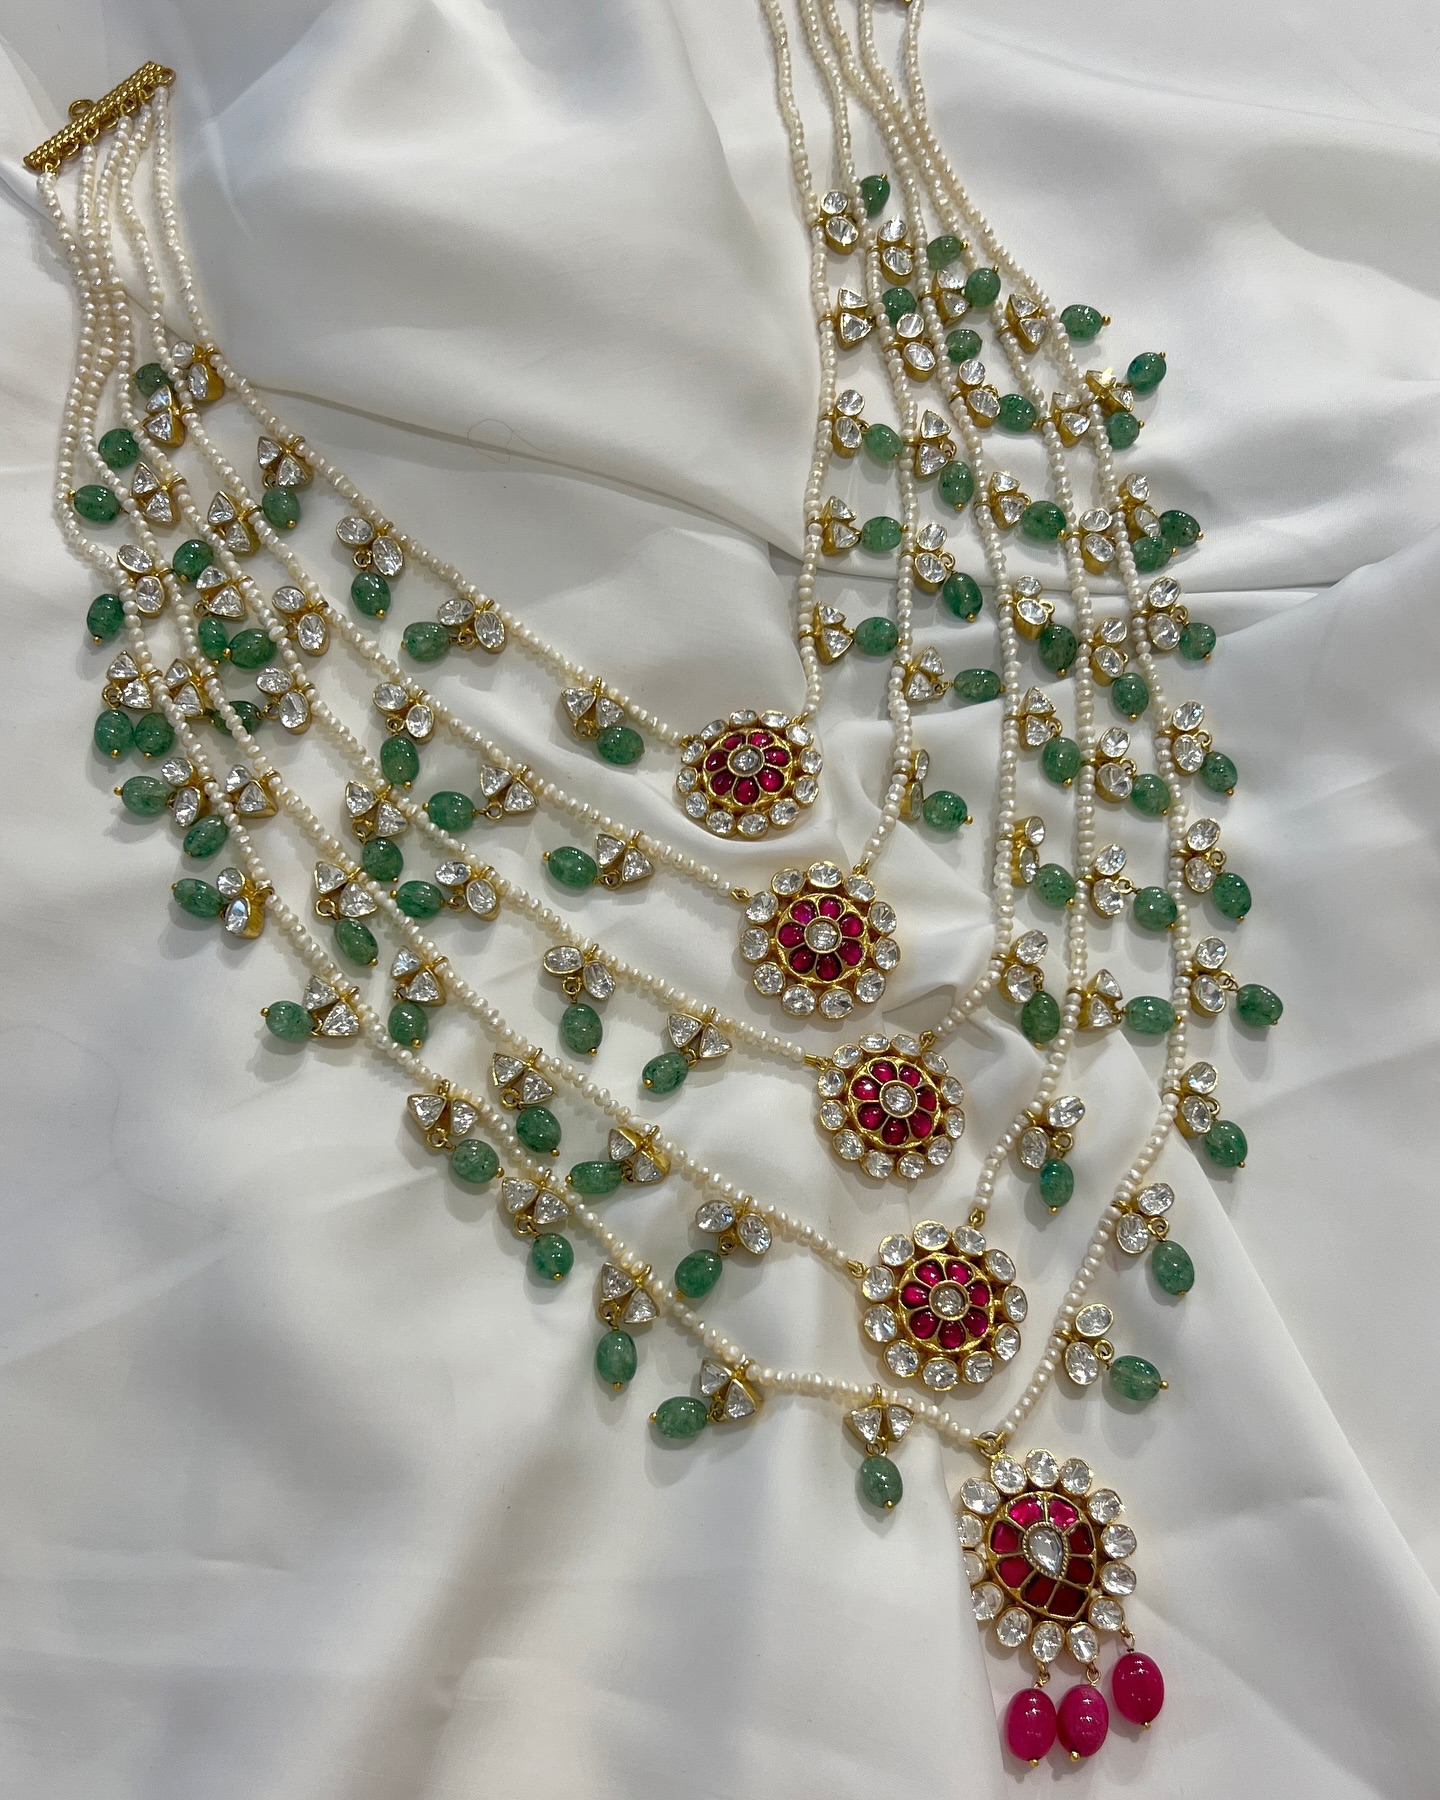 Temple and Polki Necklace Collection From 'Rajatamaya'